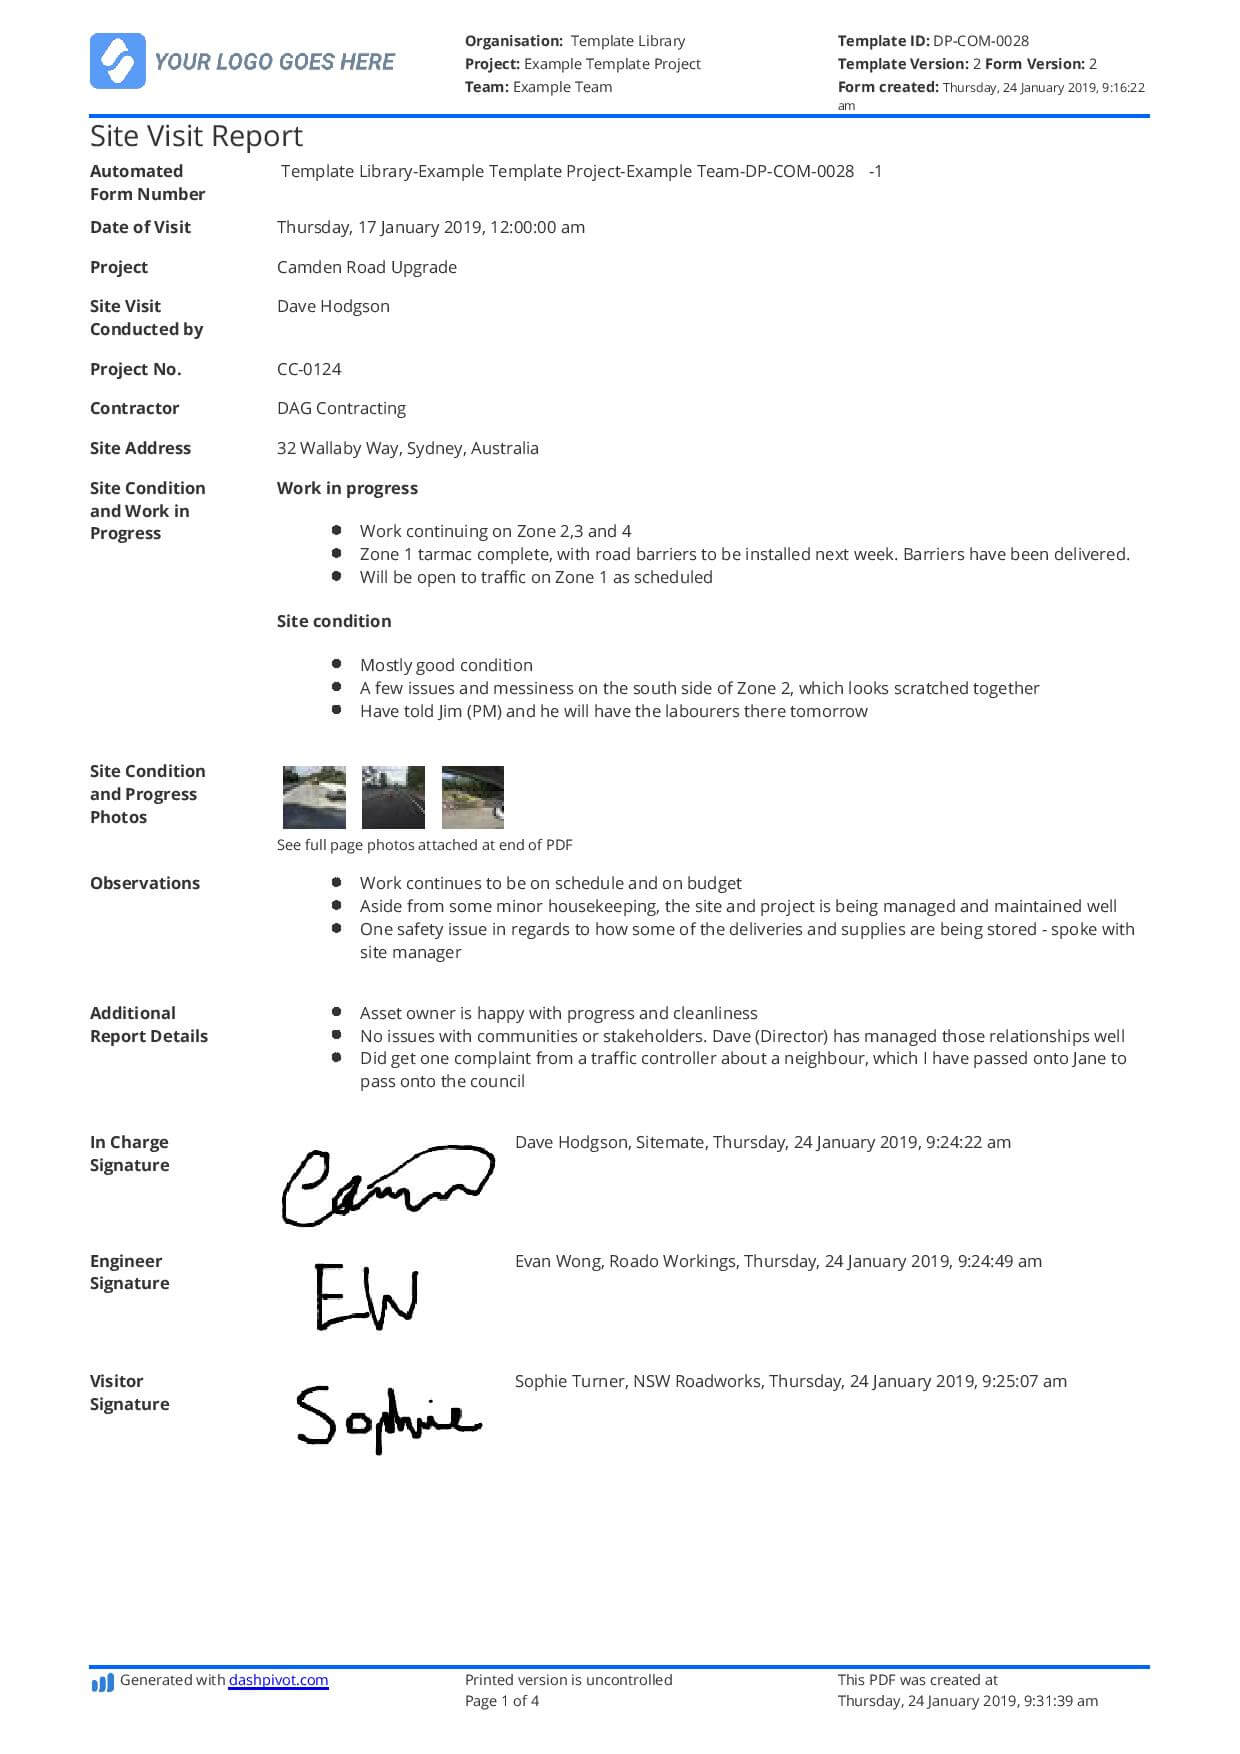 Construction Site Visit Report Template And Sample [Free To Use] With Customer Visit Report Format Templates